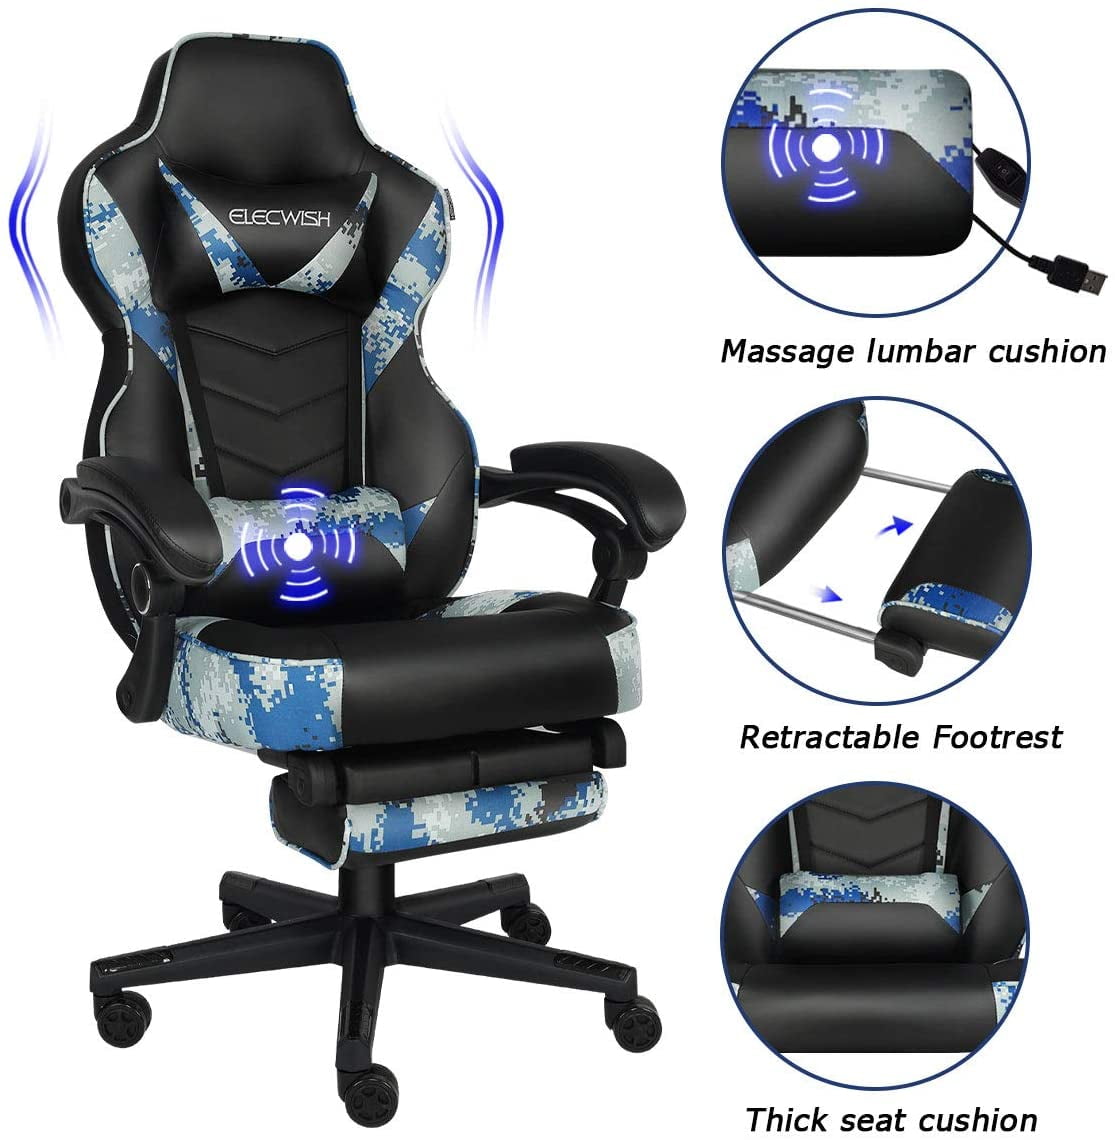 ELECWISH Video Gaming Chair Racing PU Leather Office Chair